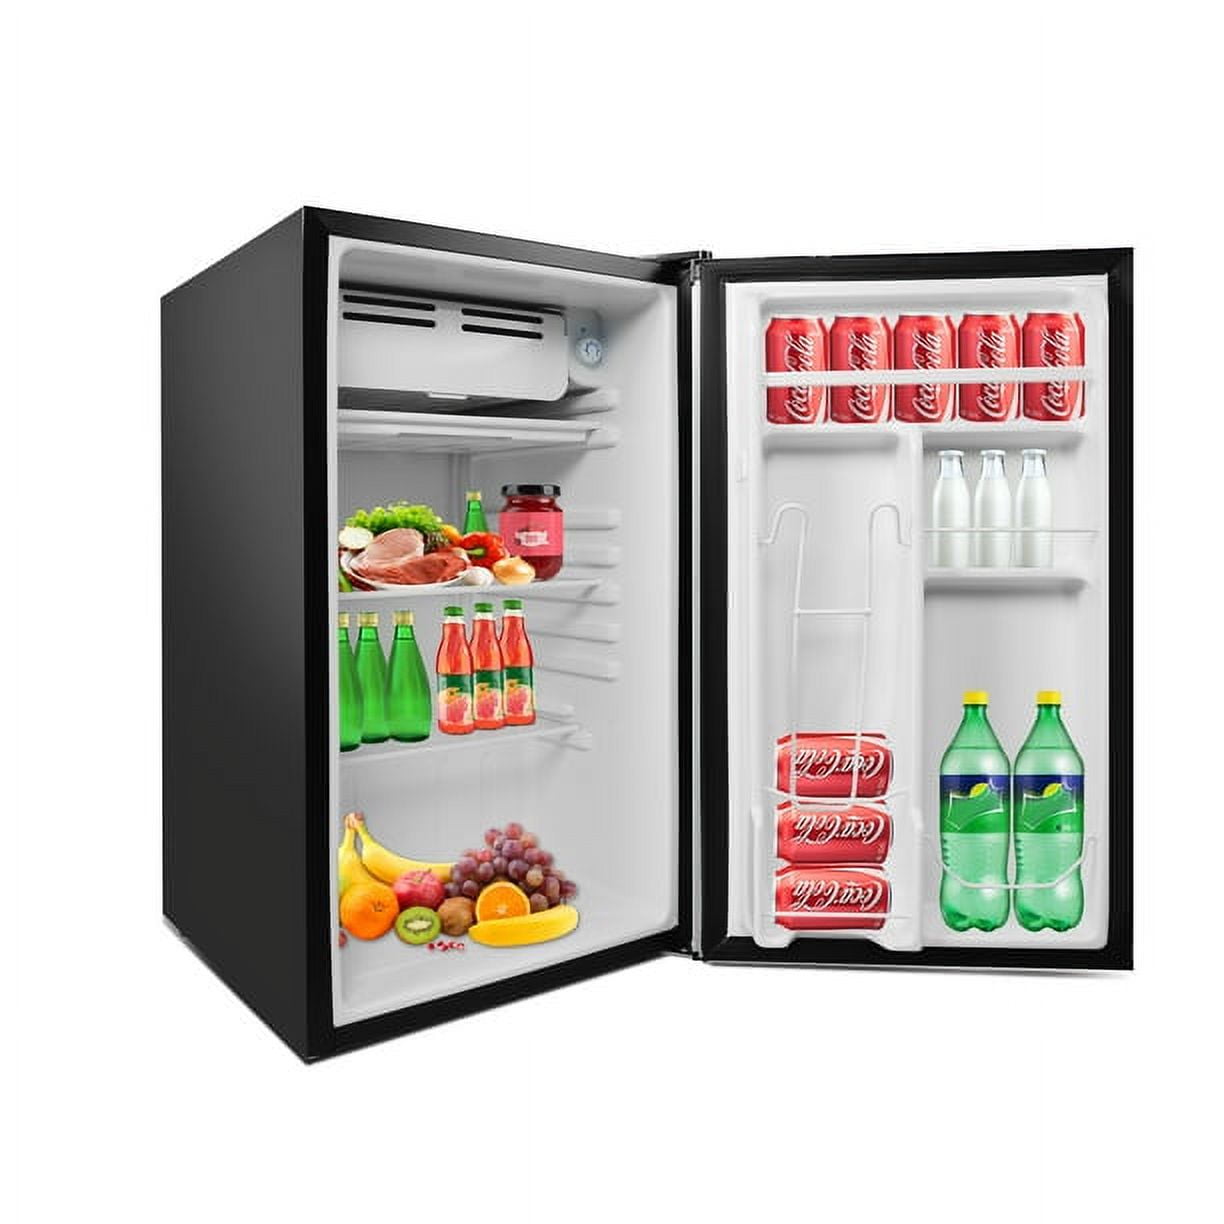 1.6 Cu.ft. Mini Fridge with Freezer. Single-Door Compact Refrigerator/Freezer with 7-Level Adjustable Thermostat. Removable Shelf. Small Refrigerator for Apartment. Office. Dorm (Black)